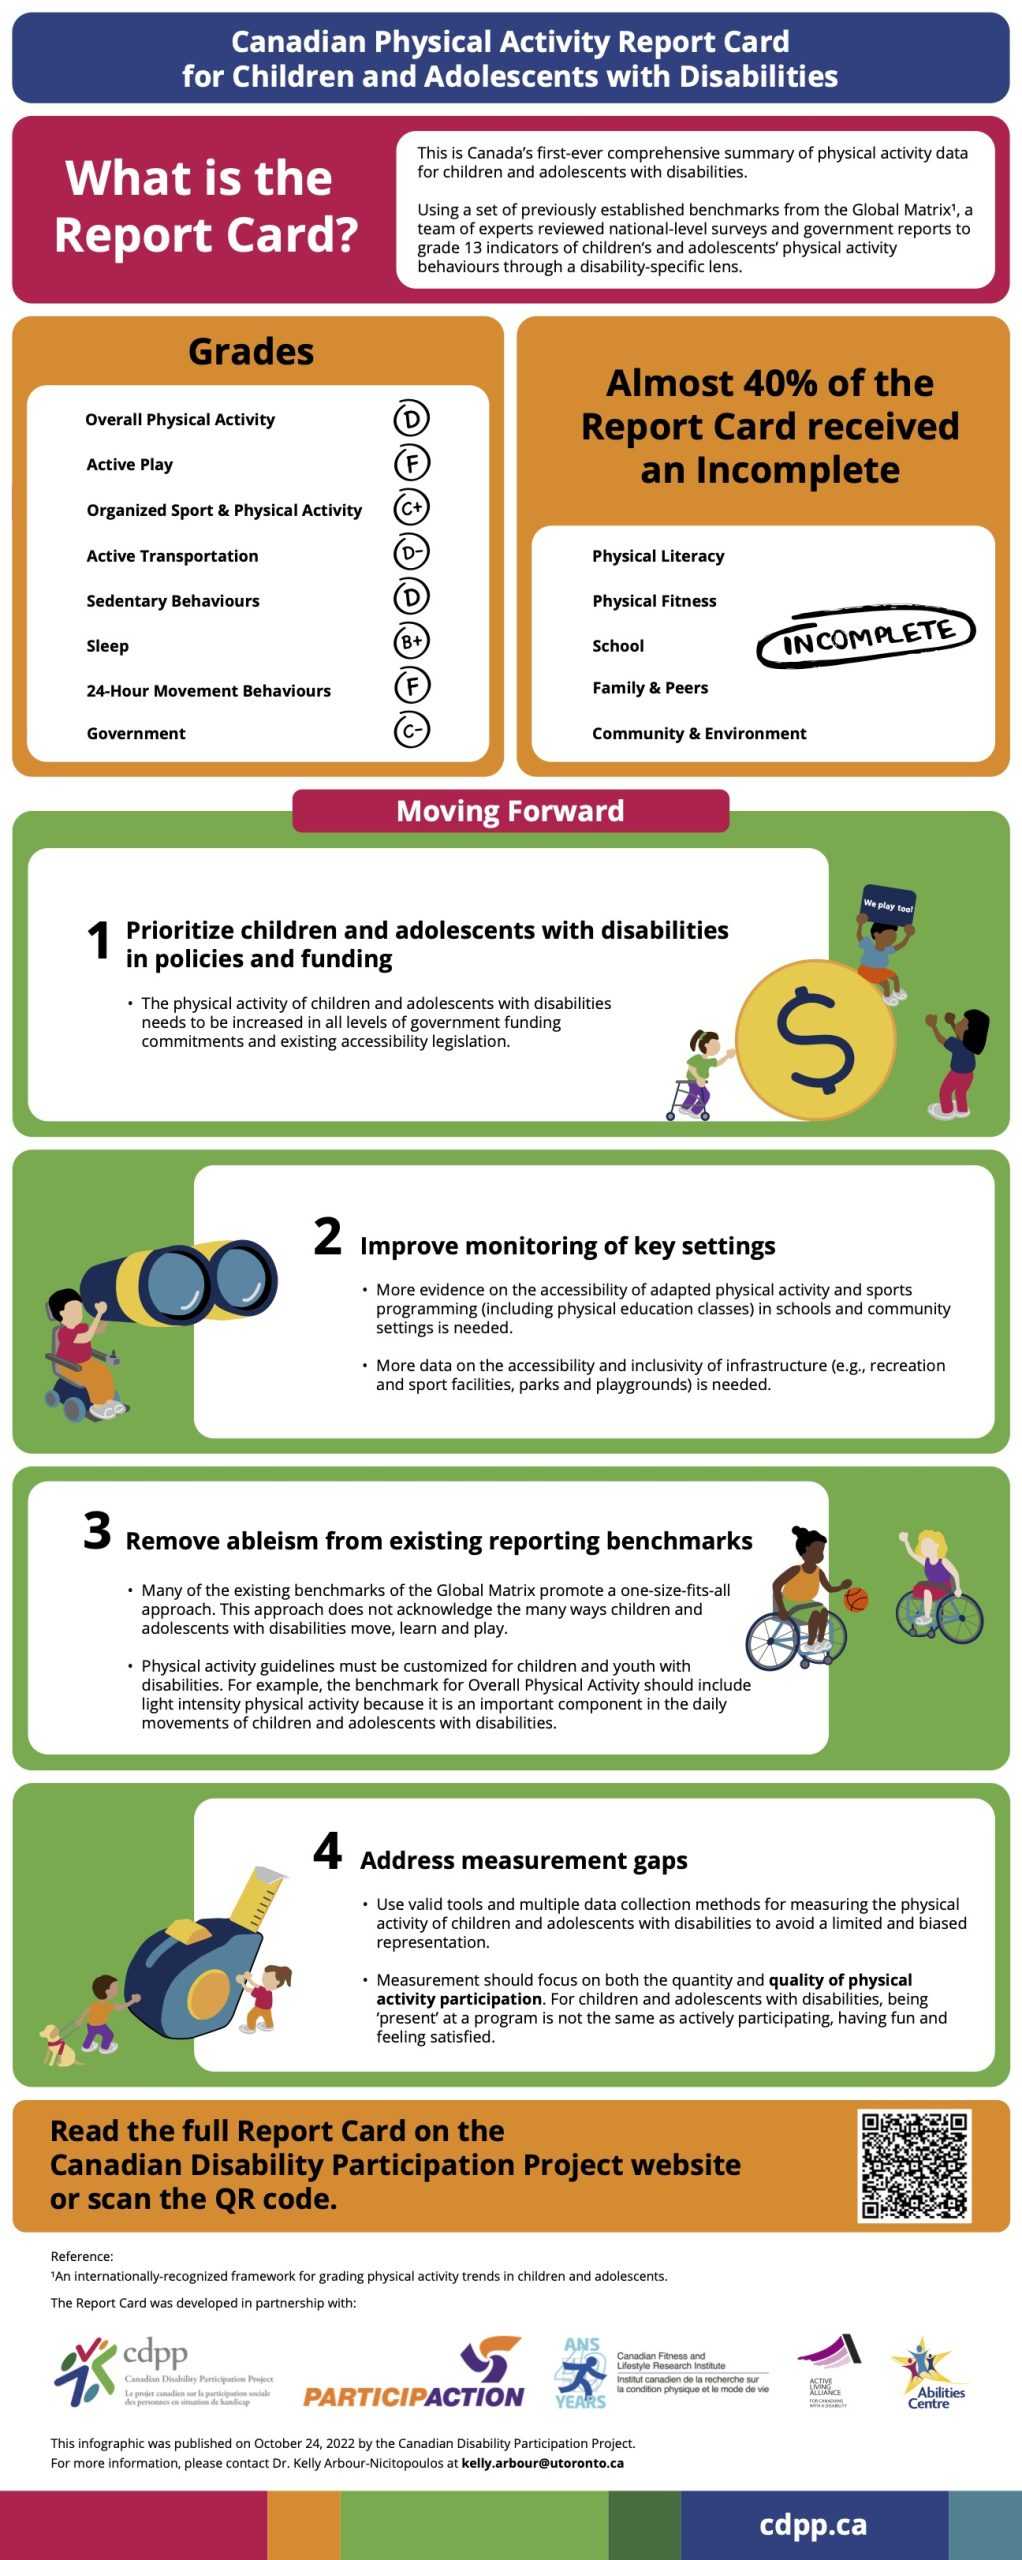 Canadian Physical Activity Report Card for Children & Adolescents with Disabilities